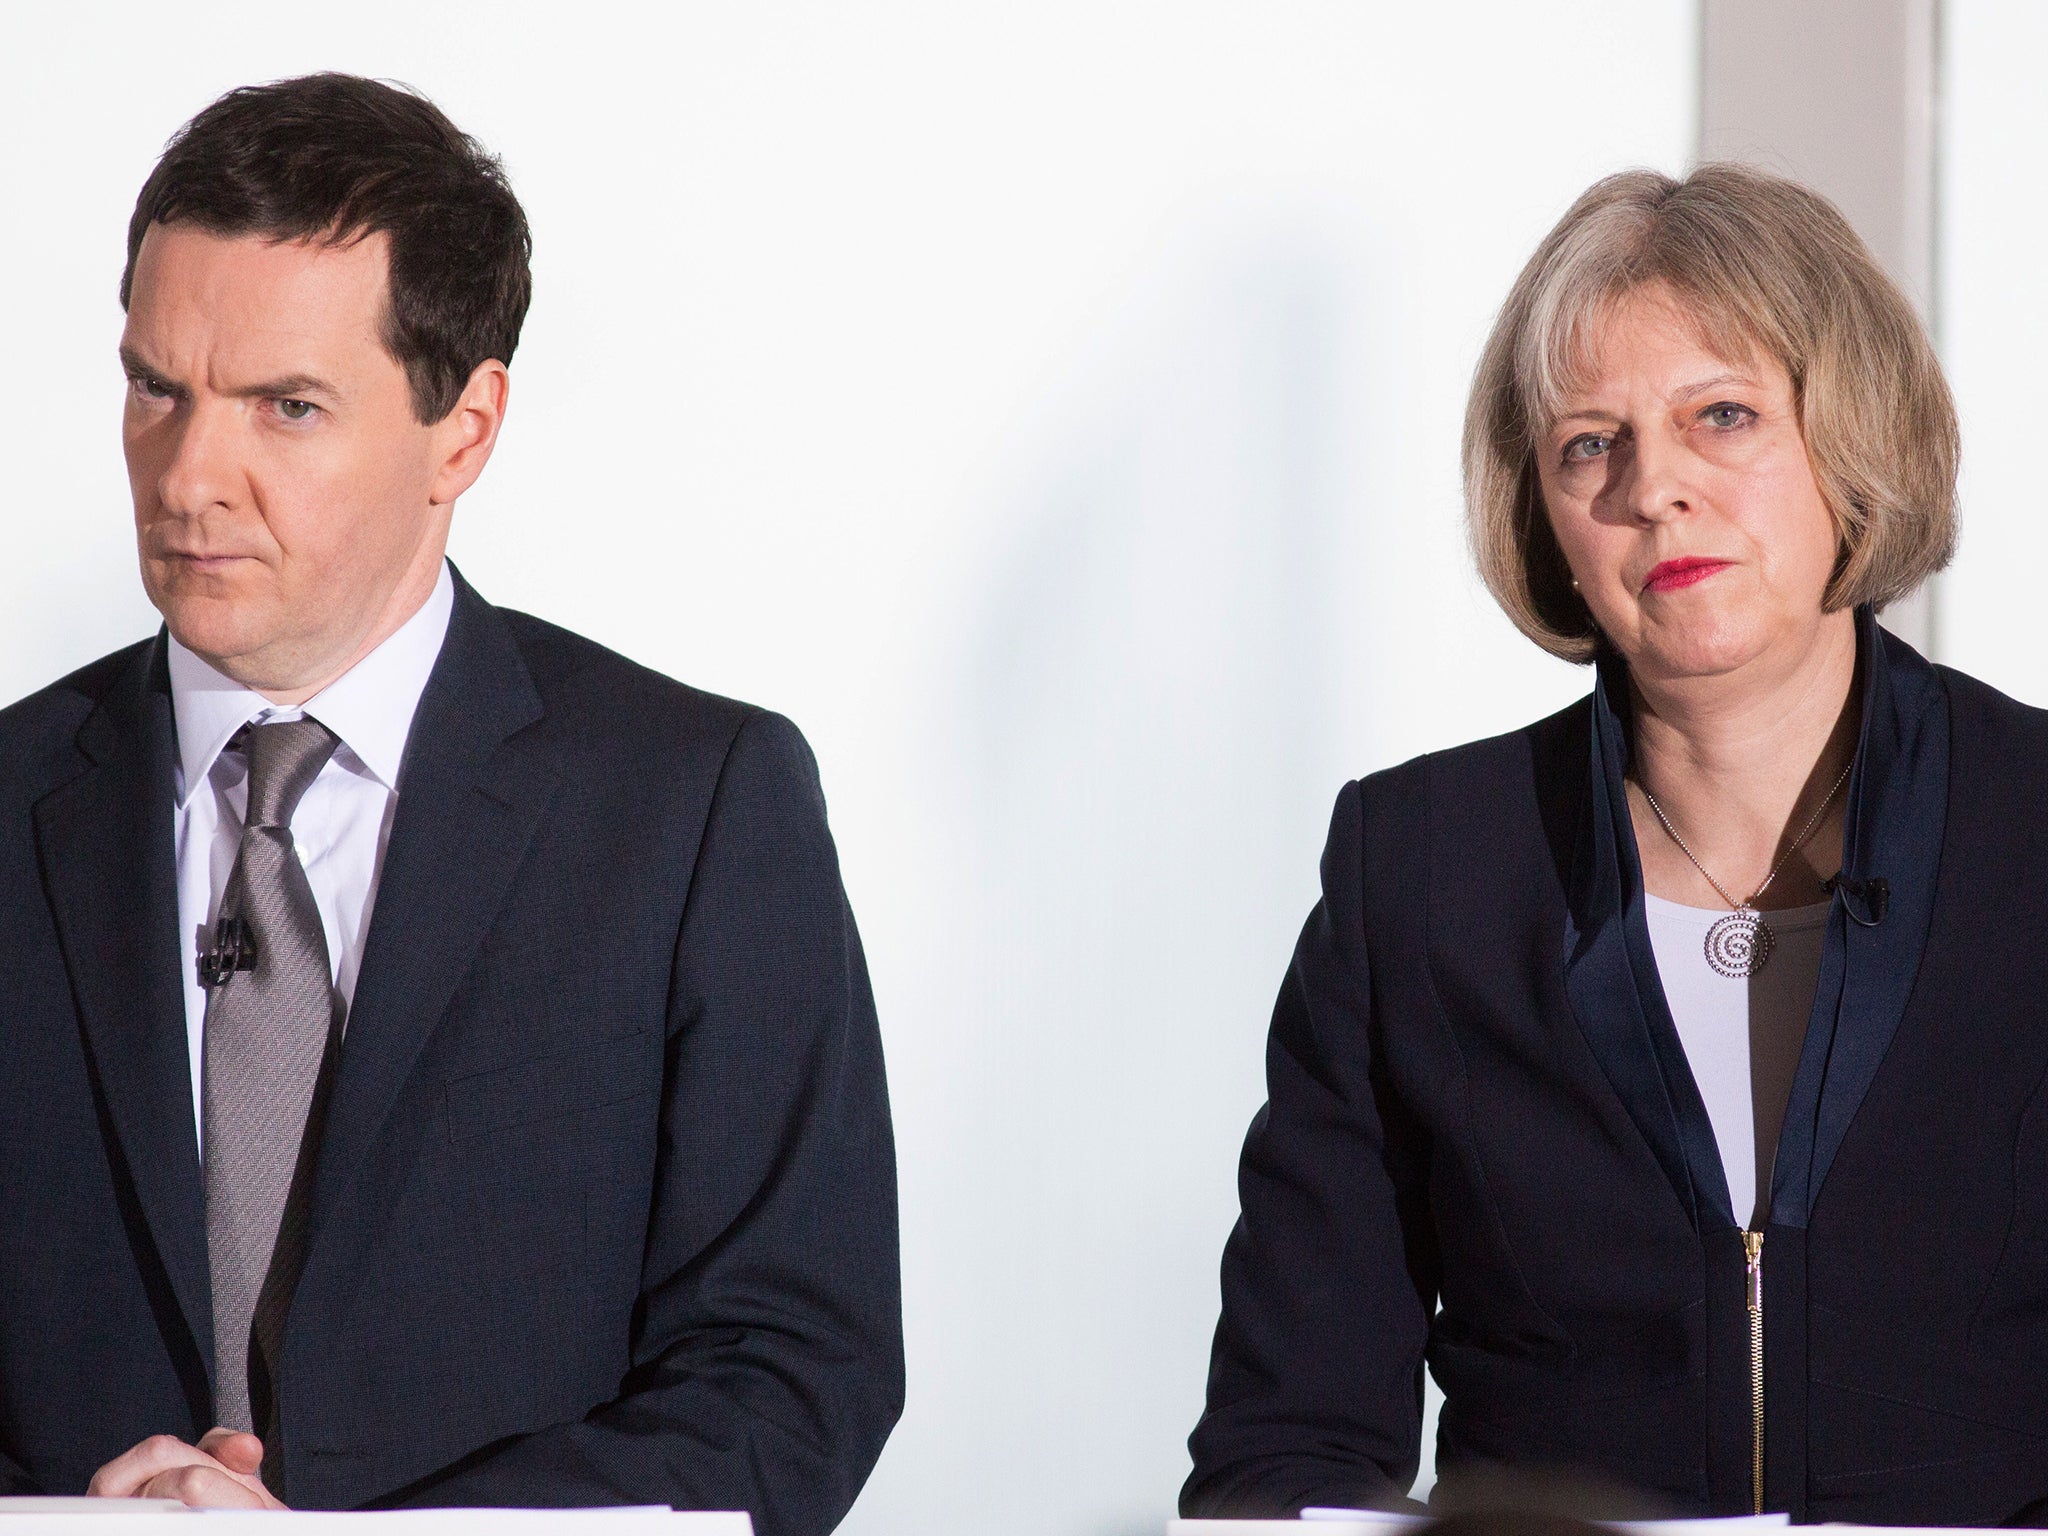 George Osborne and Theresa May have been tipped by Mr Cameron as possible successors